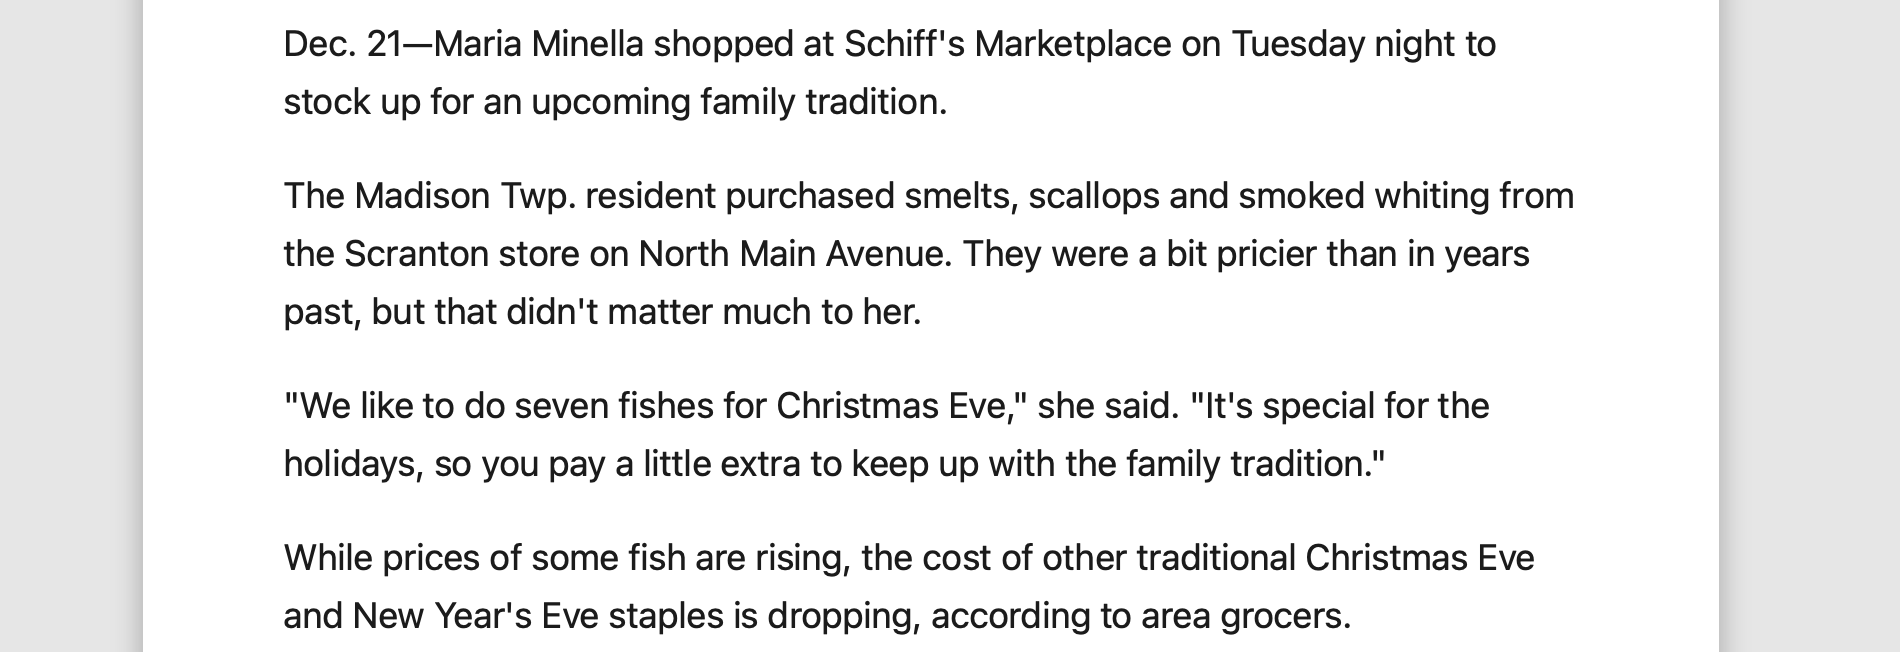 from yahoo news: Dec. 21—Maria Minella shopped at Schiff's Marketplace on Tuesday night to stock up for an upcoming family tradition. The Madison Twp. resident purchased smelts, scallops and smoked whiting from the Scranton store on North Main Avenue. They were a bit pricier than in years past, but that didn't matter much to her. "We like to do seven fishes for Christmas Eve," she said. "It's special for the holidays, so you pay a little extra to keep up with the family tradition." While prices of some fish are rising, the cost of other traditional Christmas Eve and New Year's Eve staples is dropping, according to area grocers.